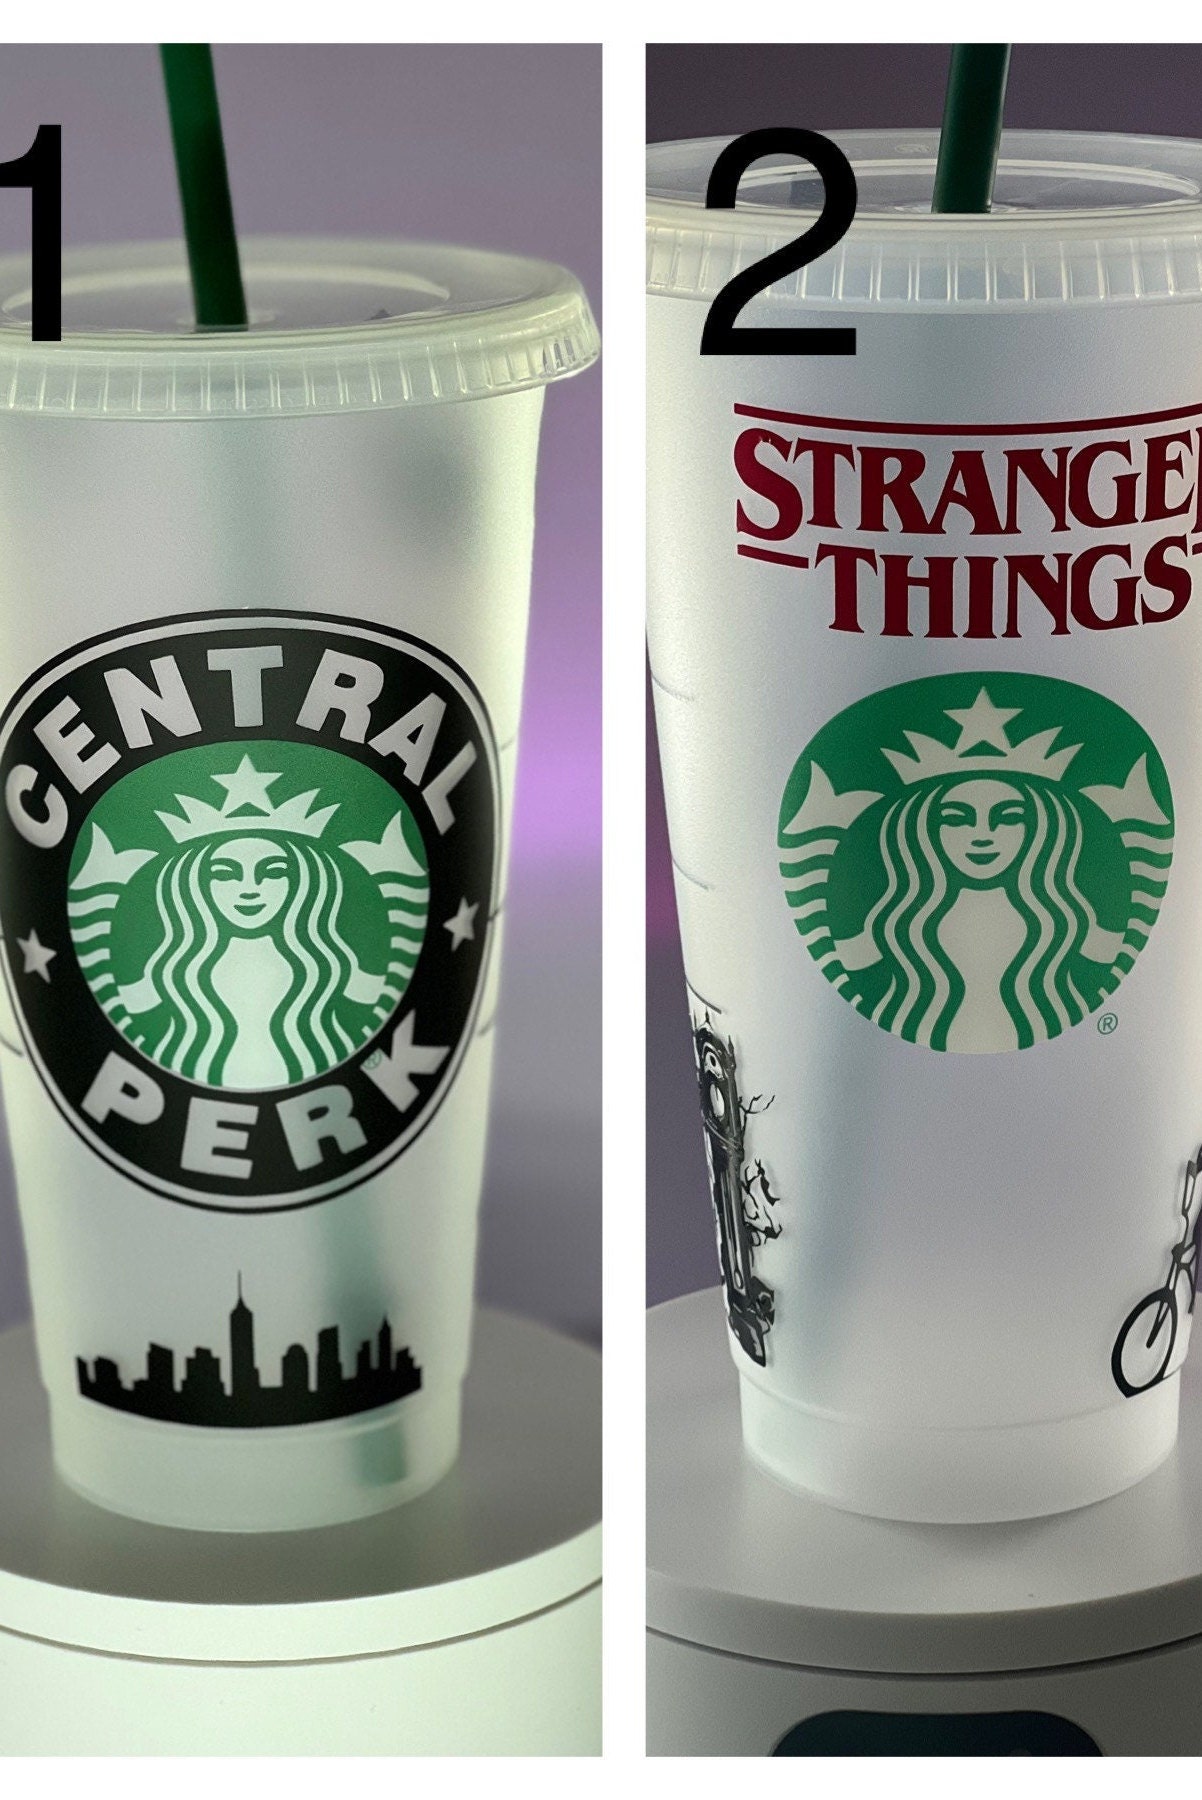 Shop Friends Inspired Reusable Starbucks Cups on